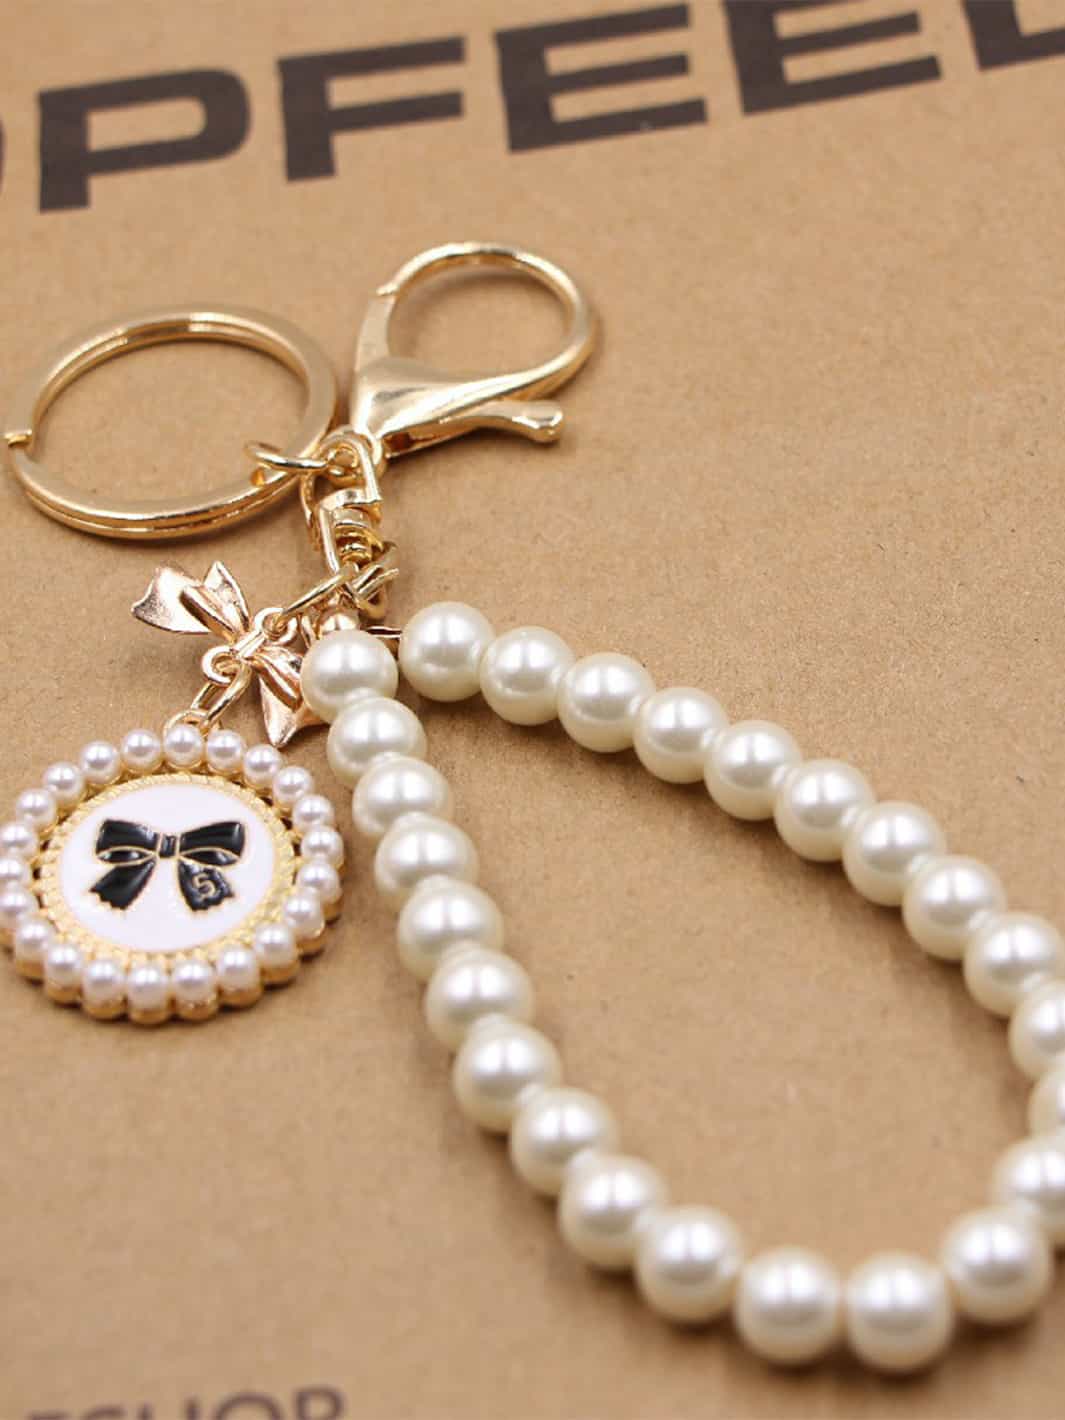 Letter Keychain Gold Color Pearl Shell Conch Heart Key Ring Key Chain Bag  Charms Key Accessories – the best products in the Joom Geek online store